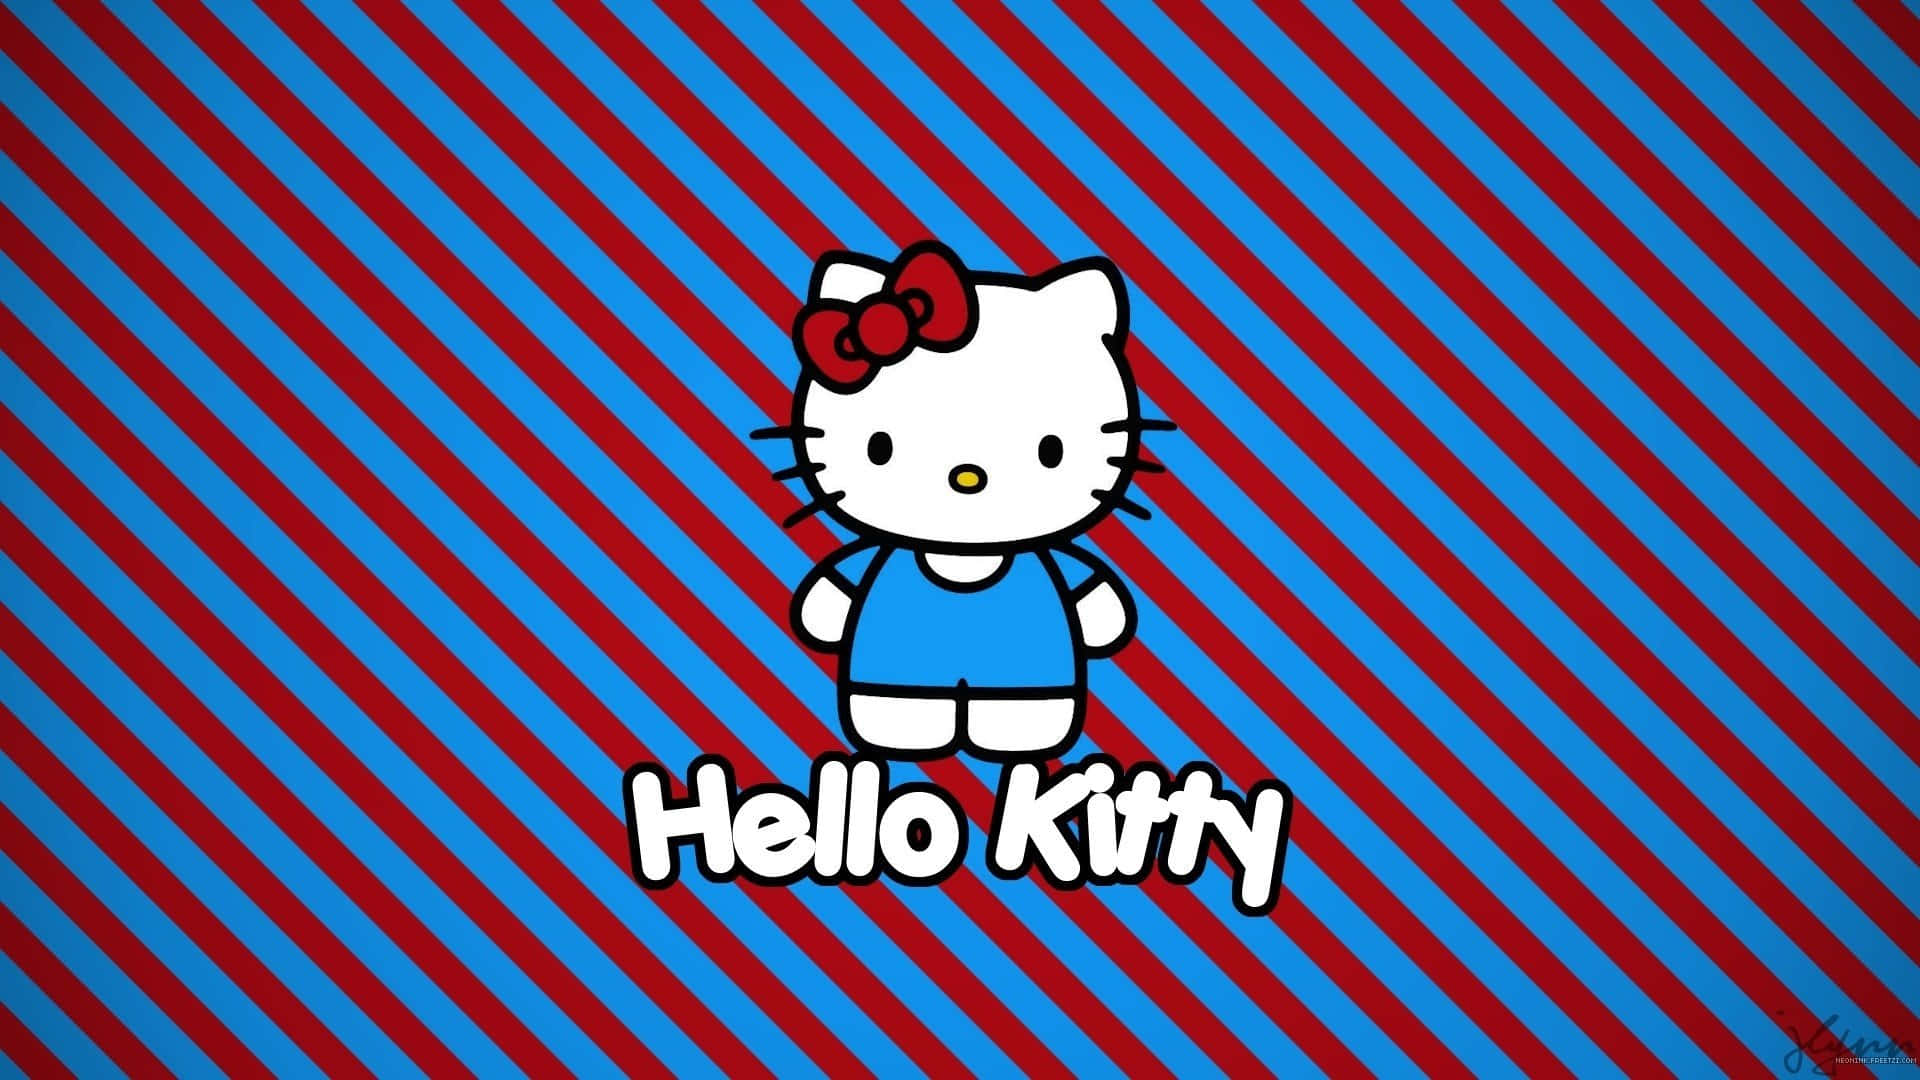 Hello Kitty On A Blue And Red Striped Background Wallpaper